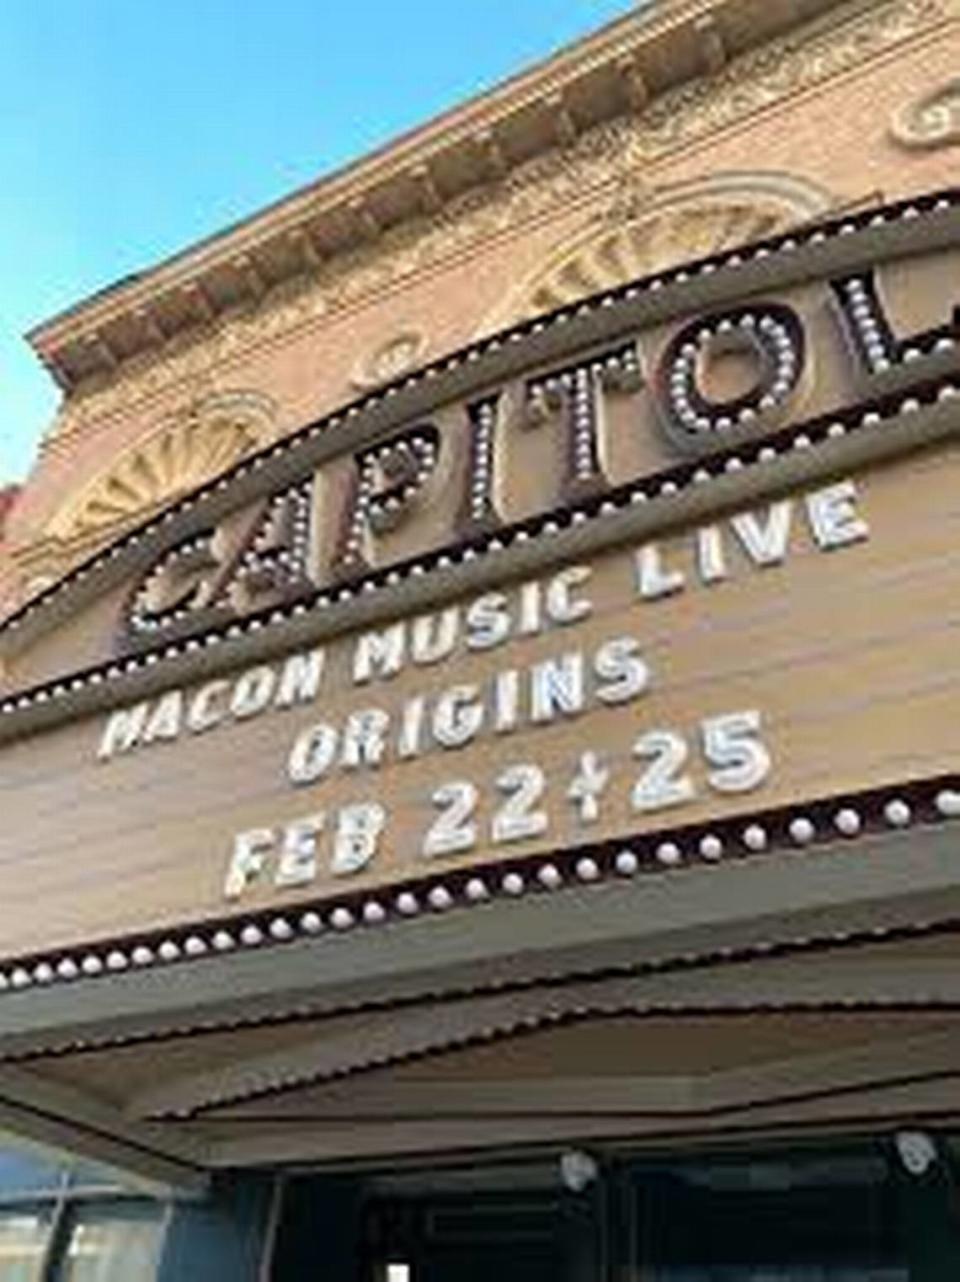 An International Music Study shows proof of vitality and resources and provides a plan to amplify Macon’s music economy. File Photo